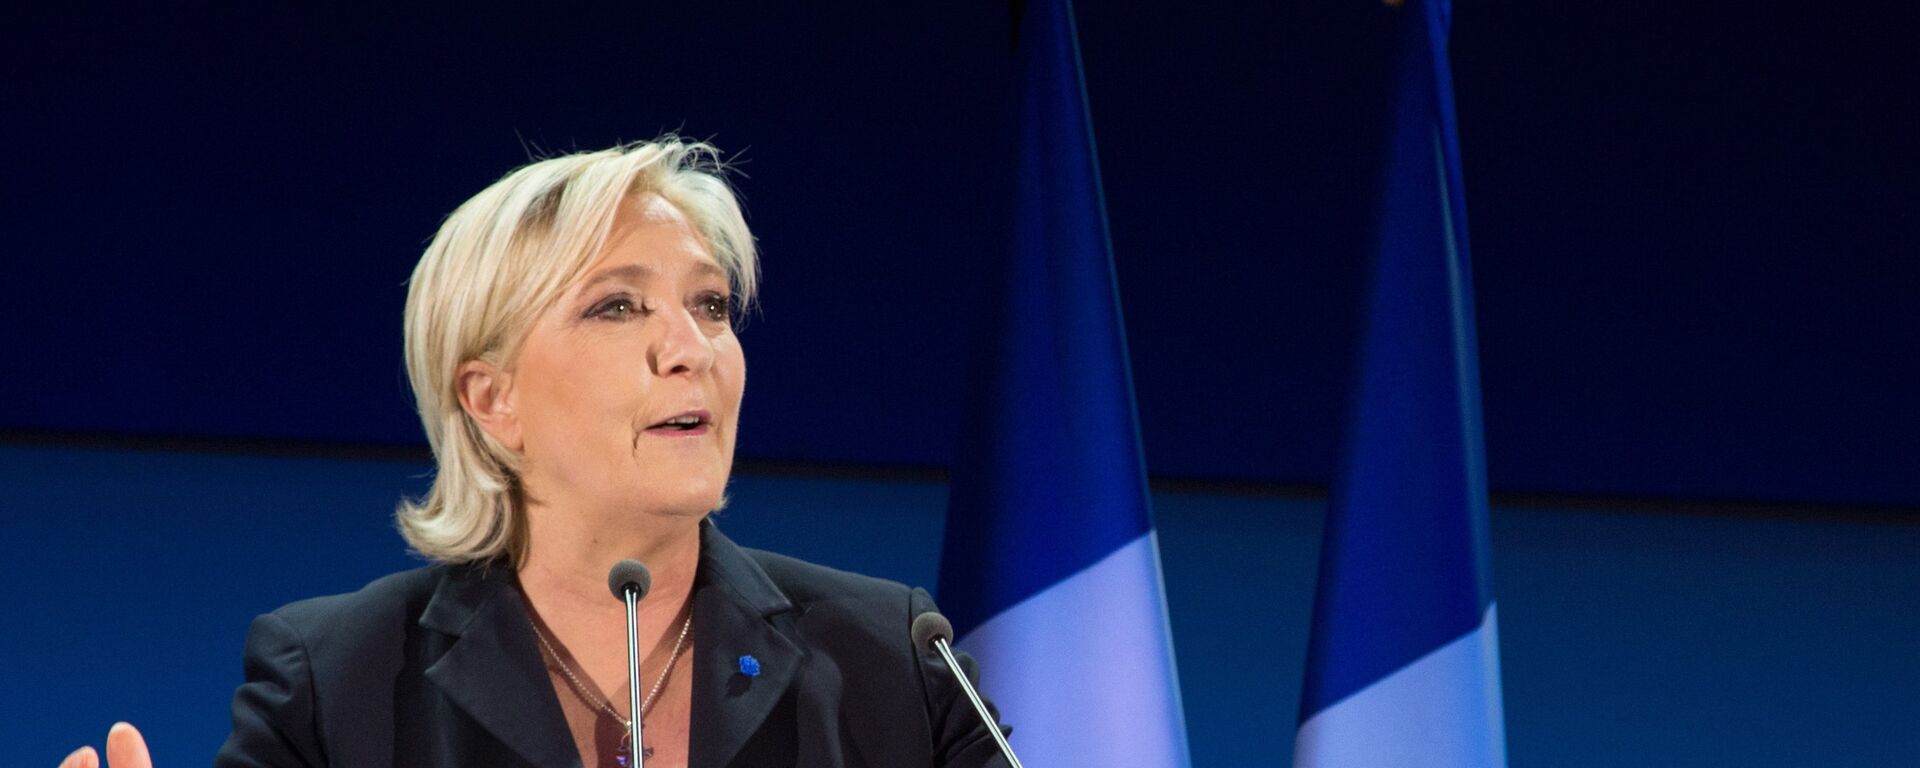 Marine Le Pen, French presidential candidate and leader of the political party the National Front, during a news conference following the first round of the presidential election. - Sputnik Moldova-România, 1920, 19.09.2022